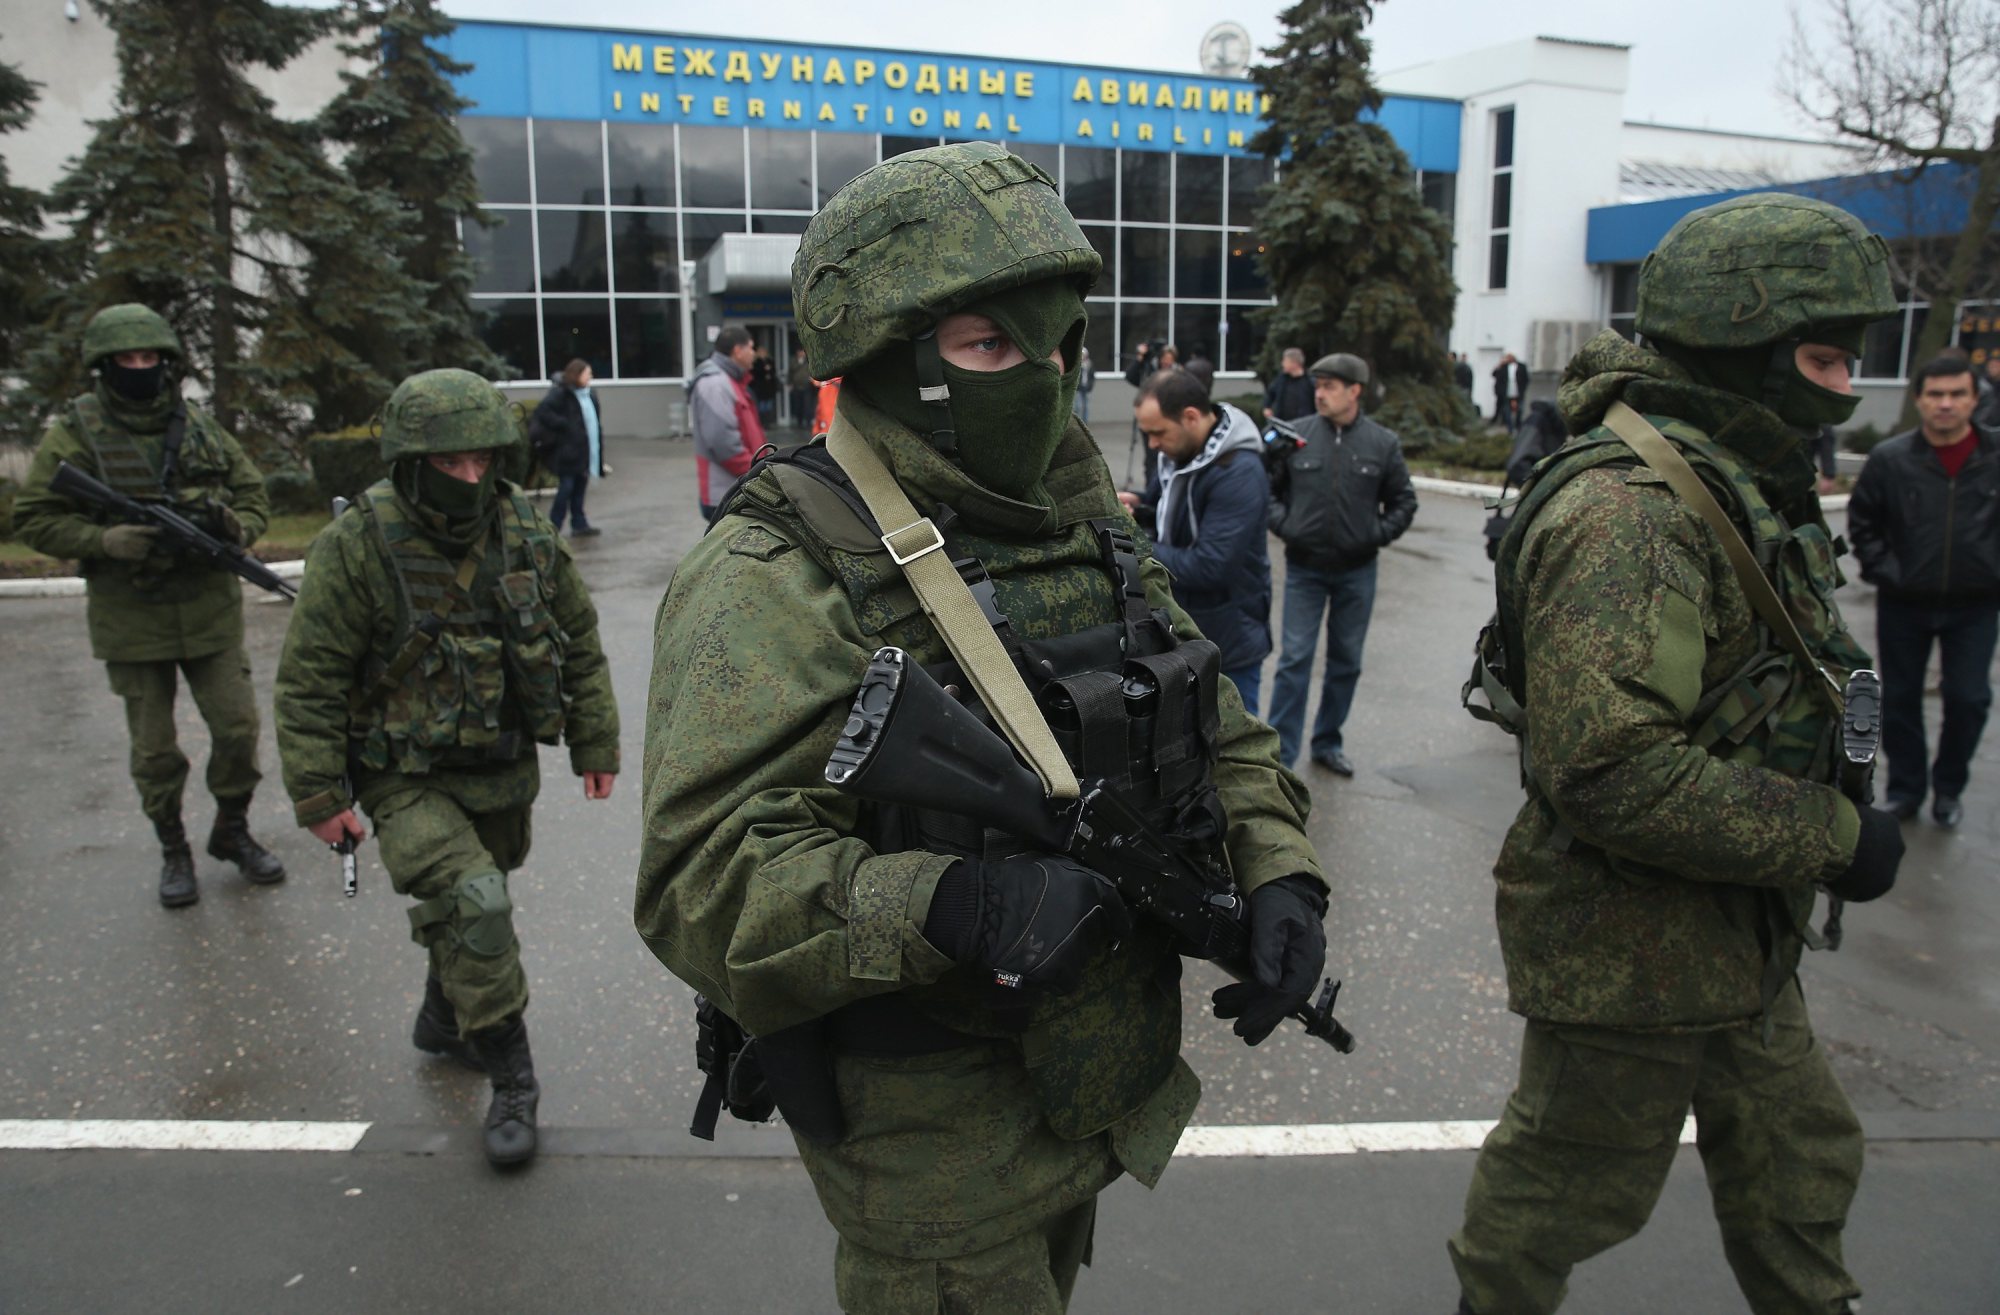 Soldiers, who were wearing no identifying insignia and declined to say whether they were Russian or Ukrainian, patrol outside the Simferopol International Airport after a pro-Russian crowd had gathered on Feb. 28, 2014.